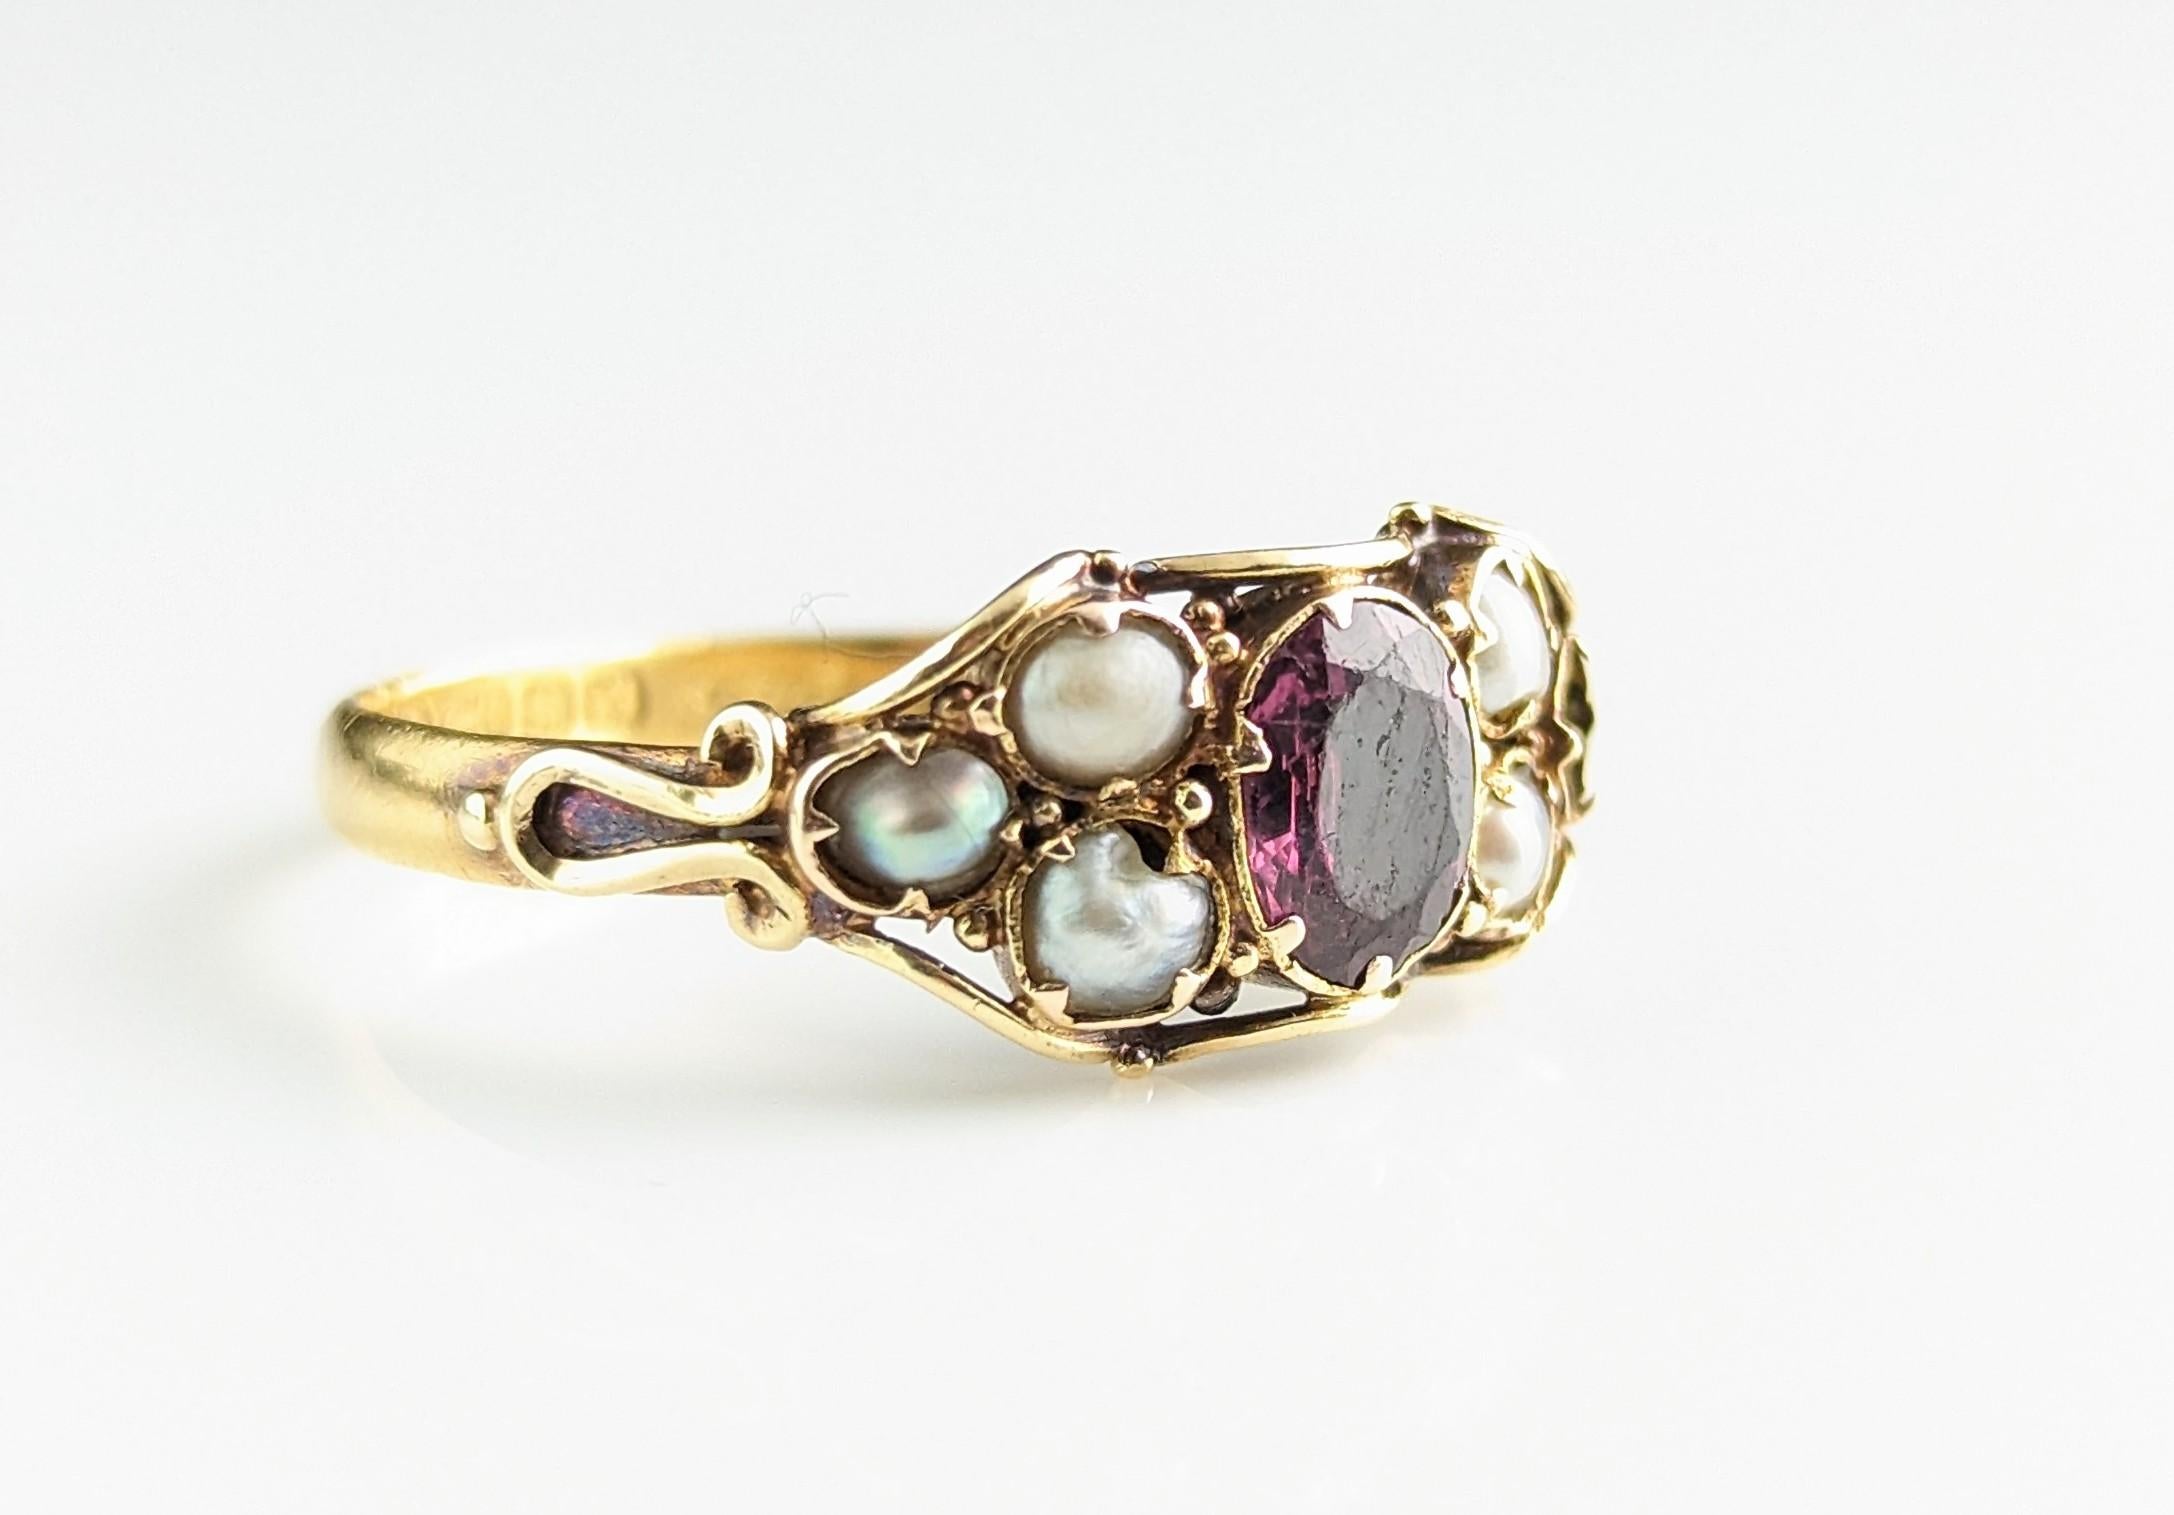 Antique Almandine Garnet and Pearl Ring, 22k Yellow Gold 10